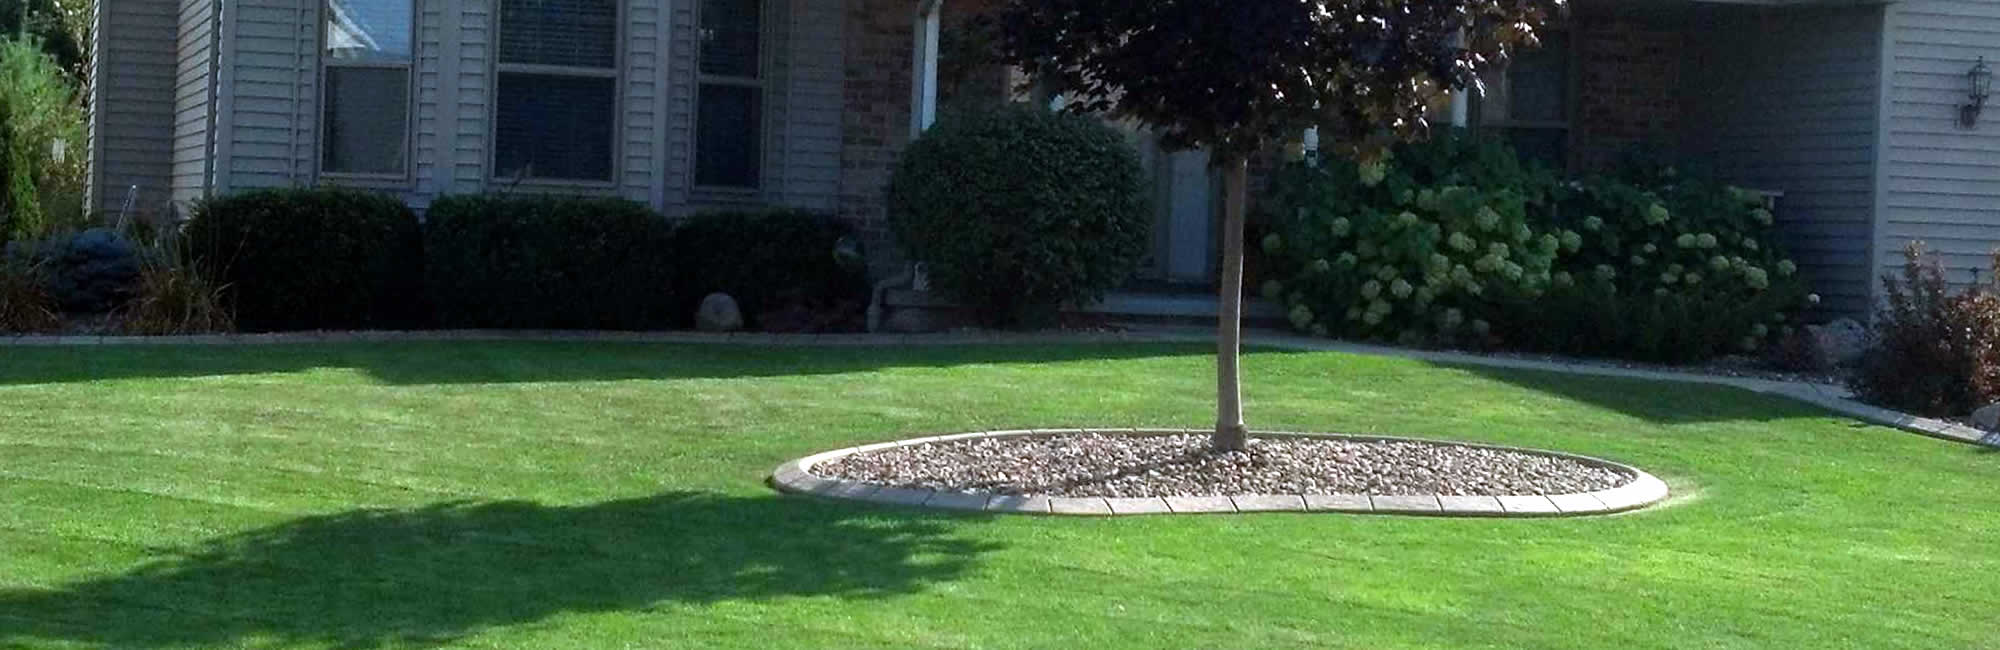 Landscape Concrete Curbing Benefits for Green Bay/Appleton area Homes and Businesses